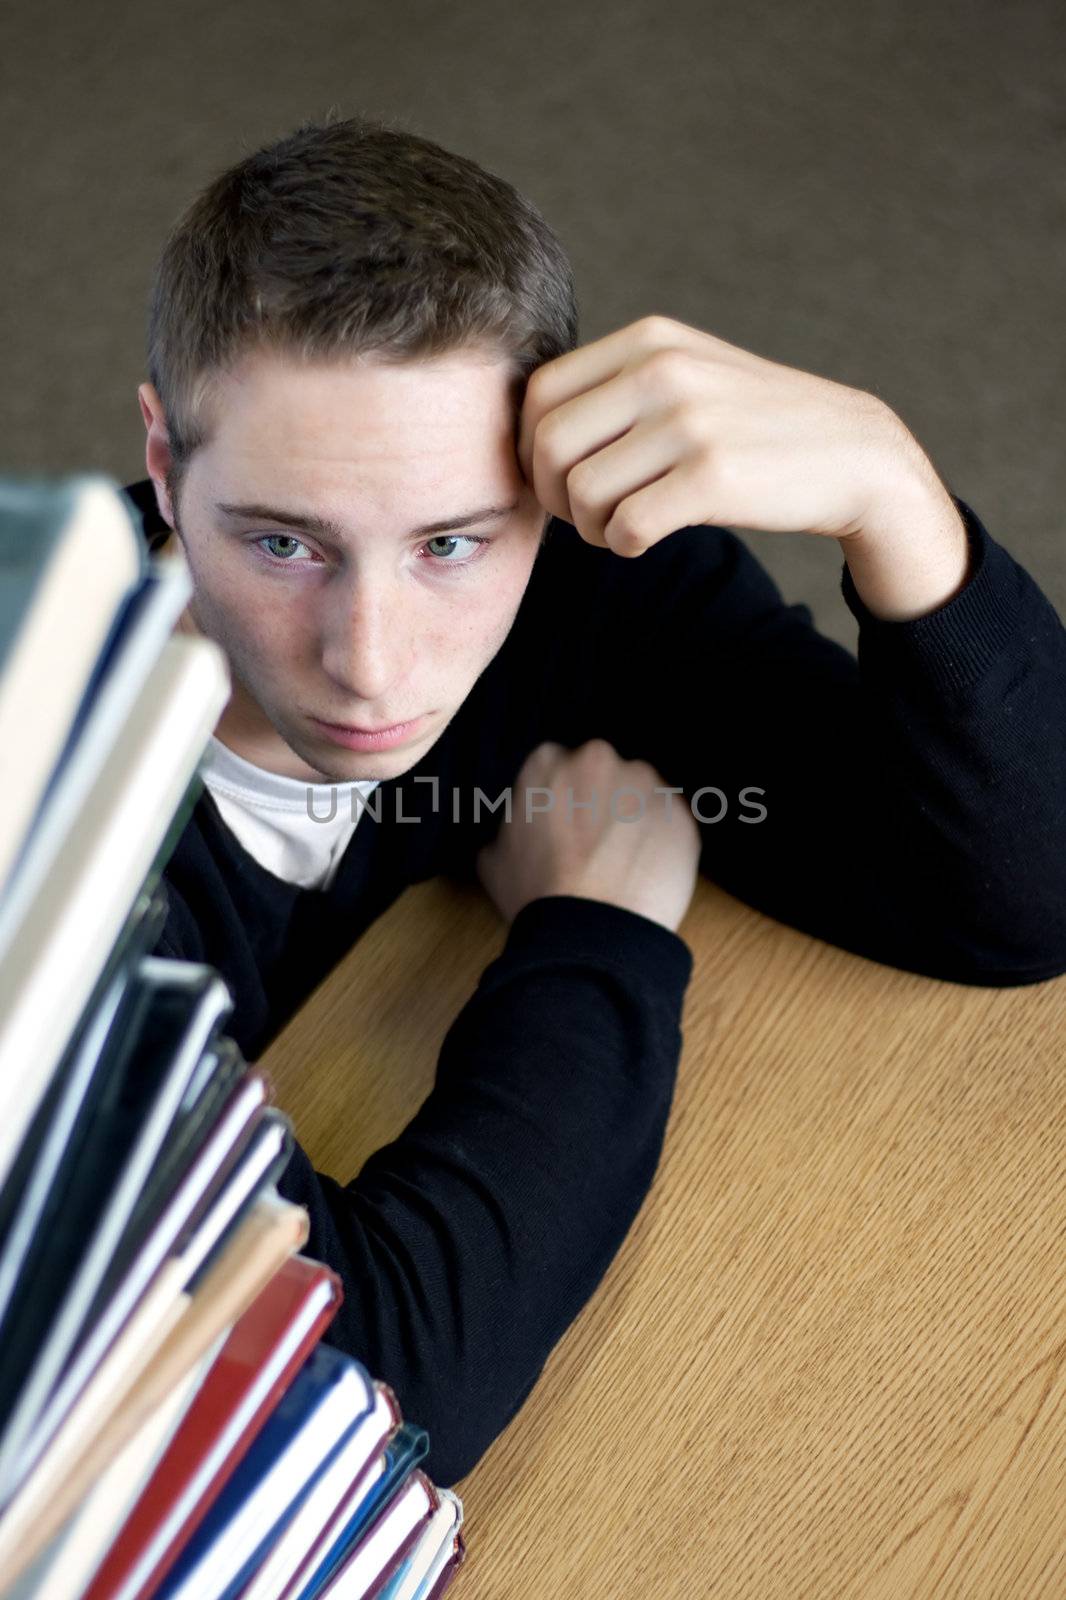 Overloaded Student Looking At Pile of Books by graficallyminded